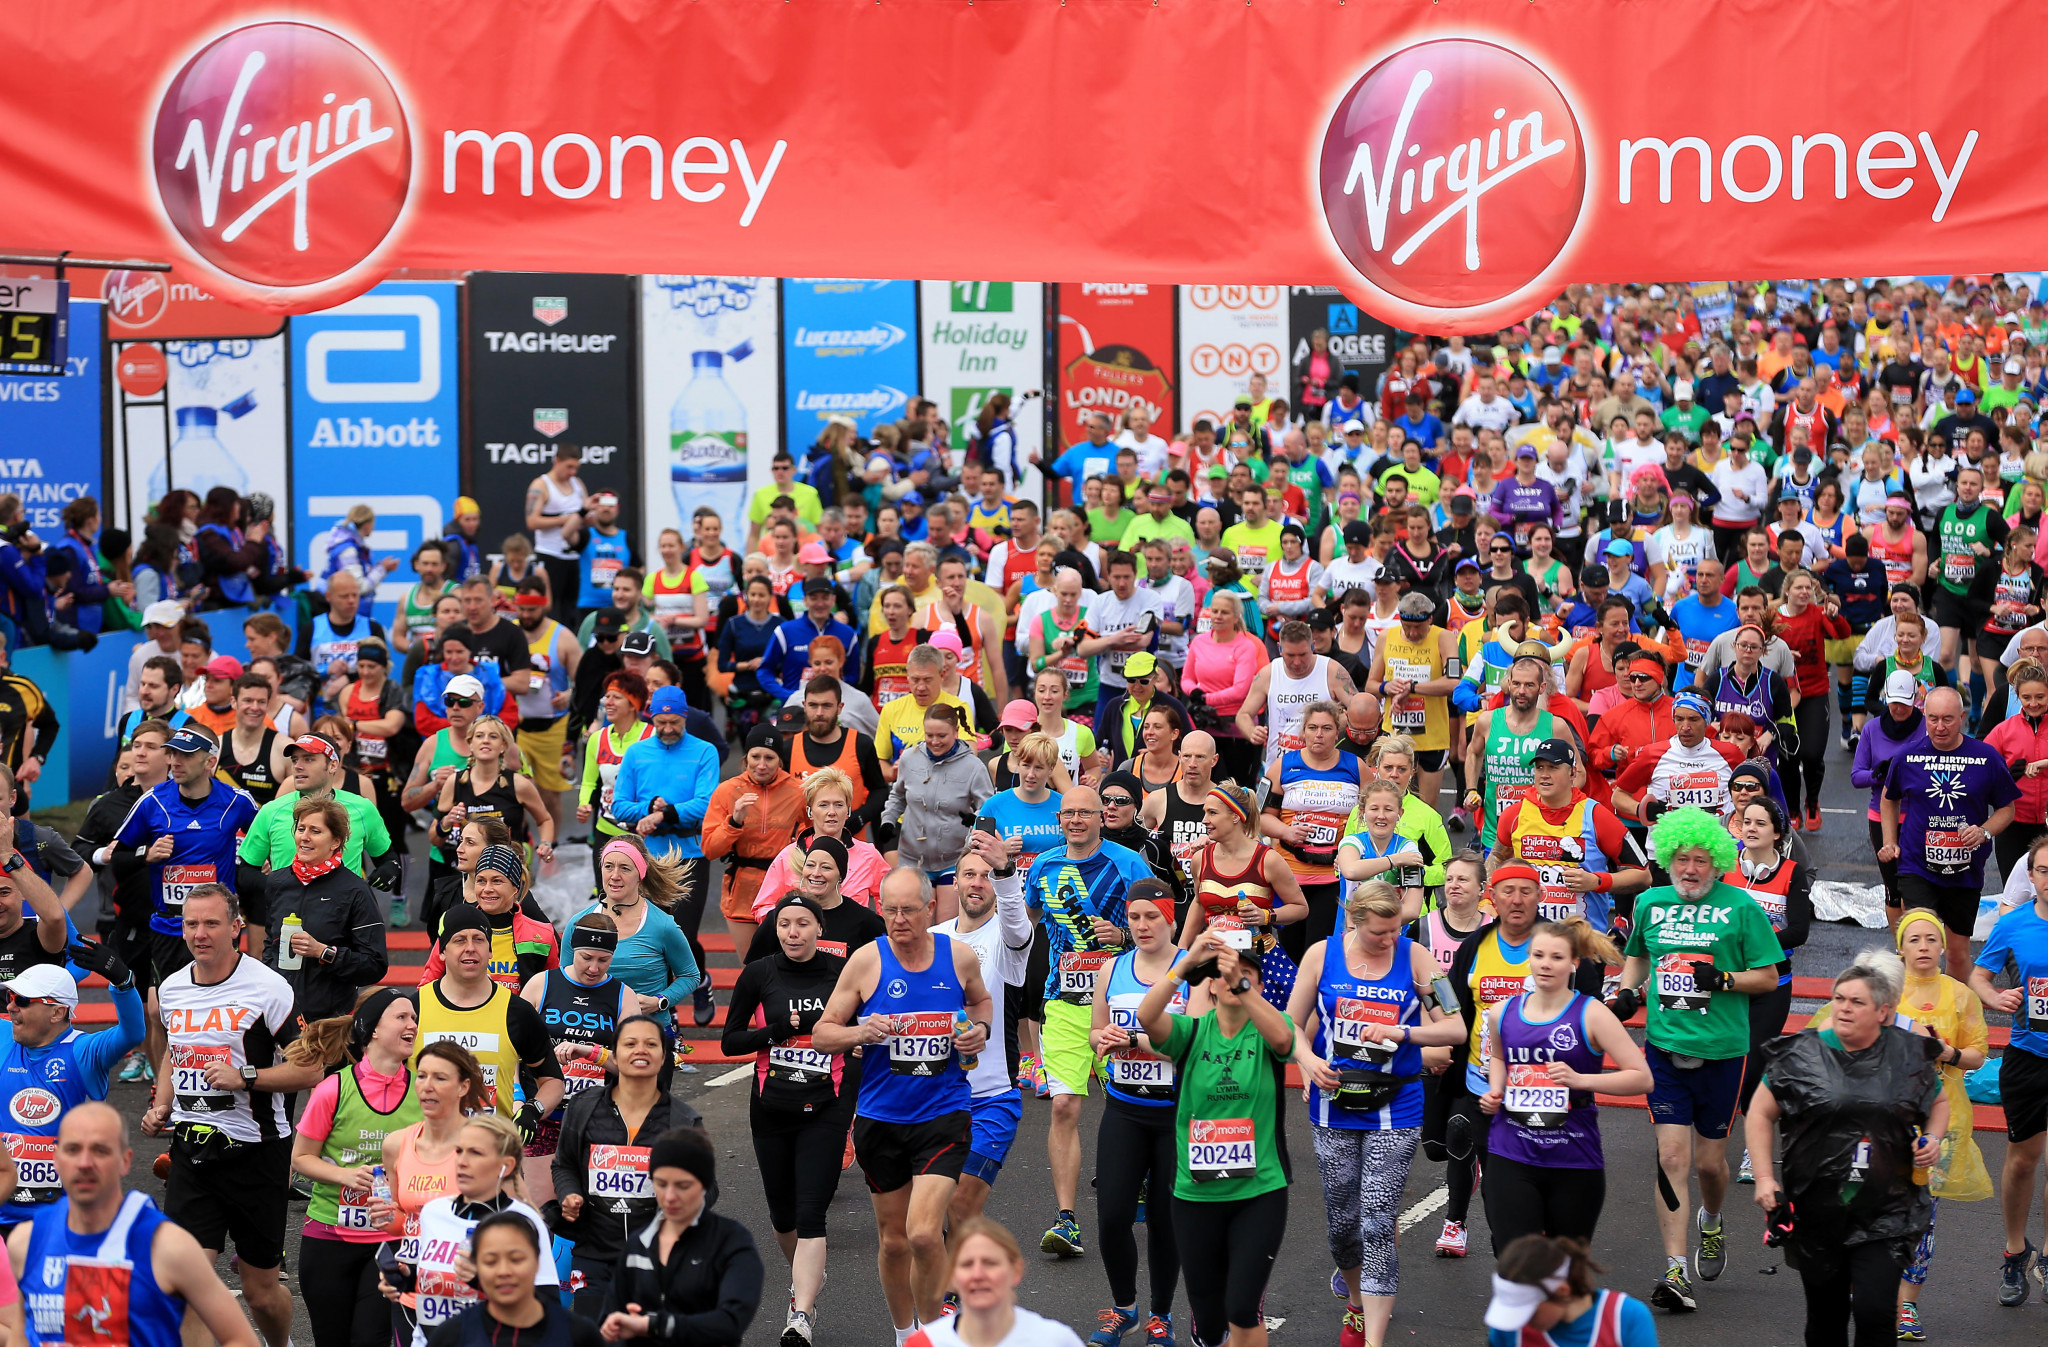 London Marathon organisers to host COVID-19 test event for UK Government